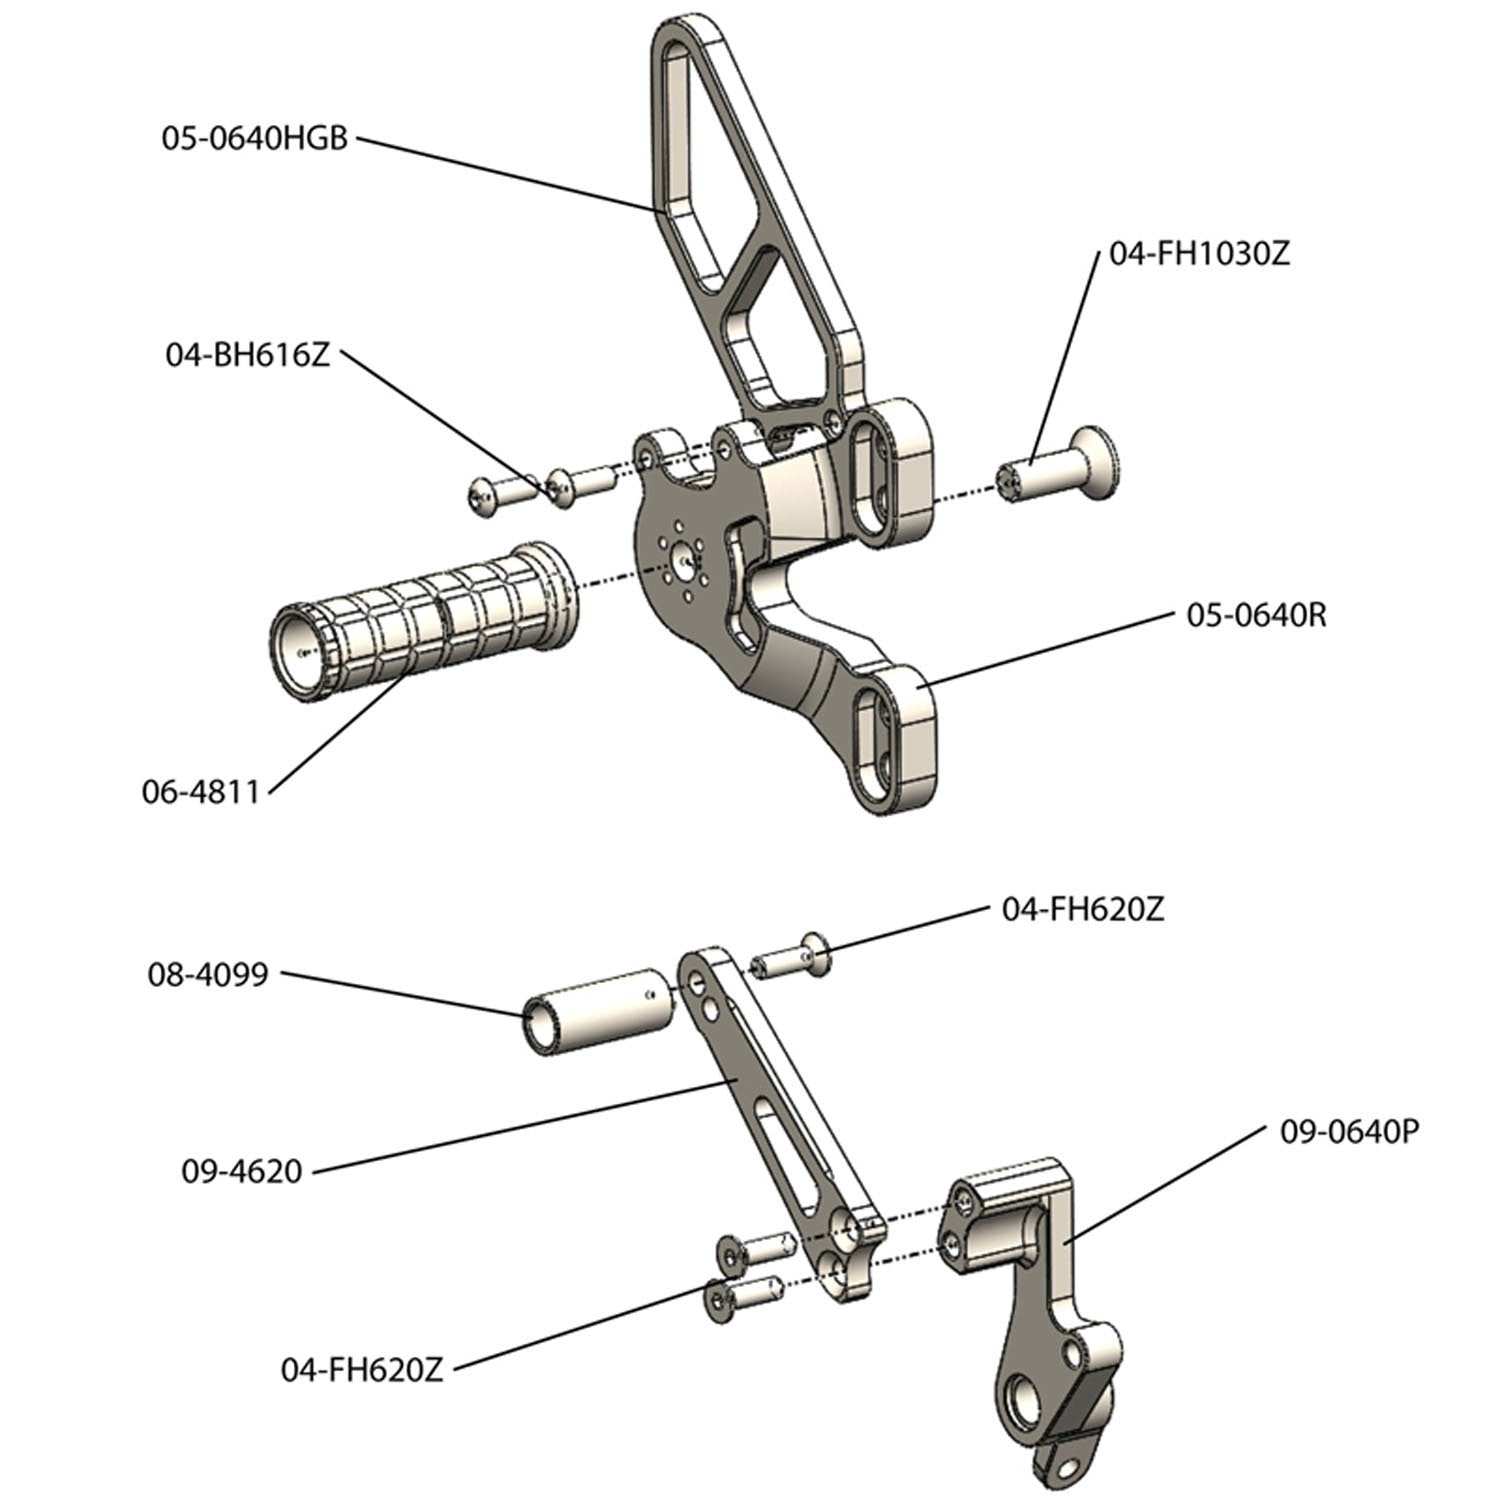 Woodcraft Ducati 1198SP 848 EVO GP Shift Complete Rearset Kit w/ Pedals (Factory QS)